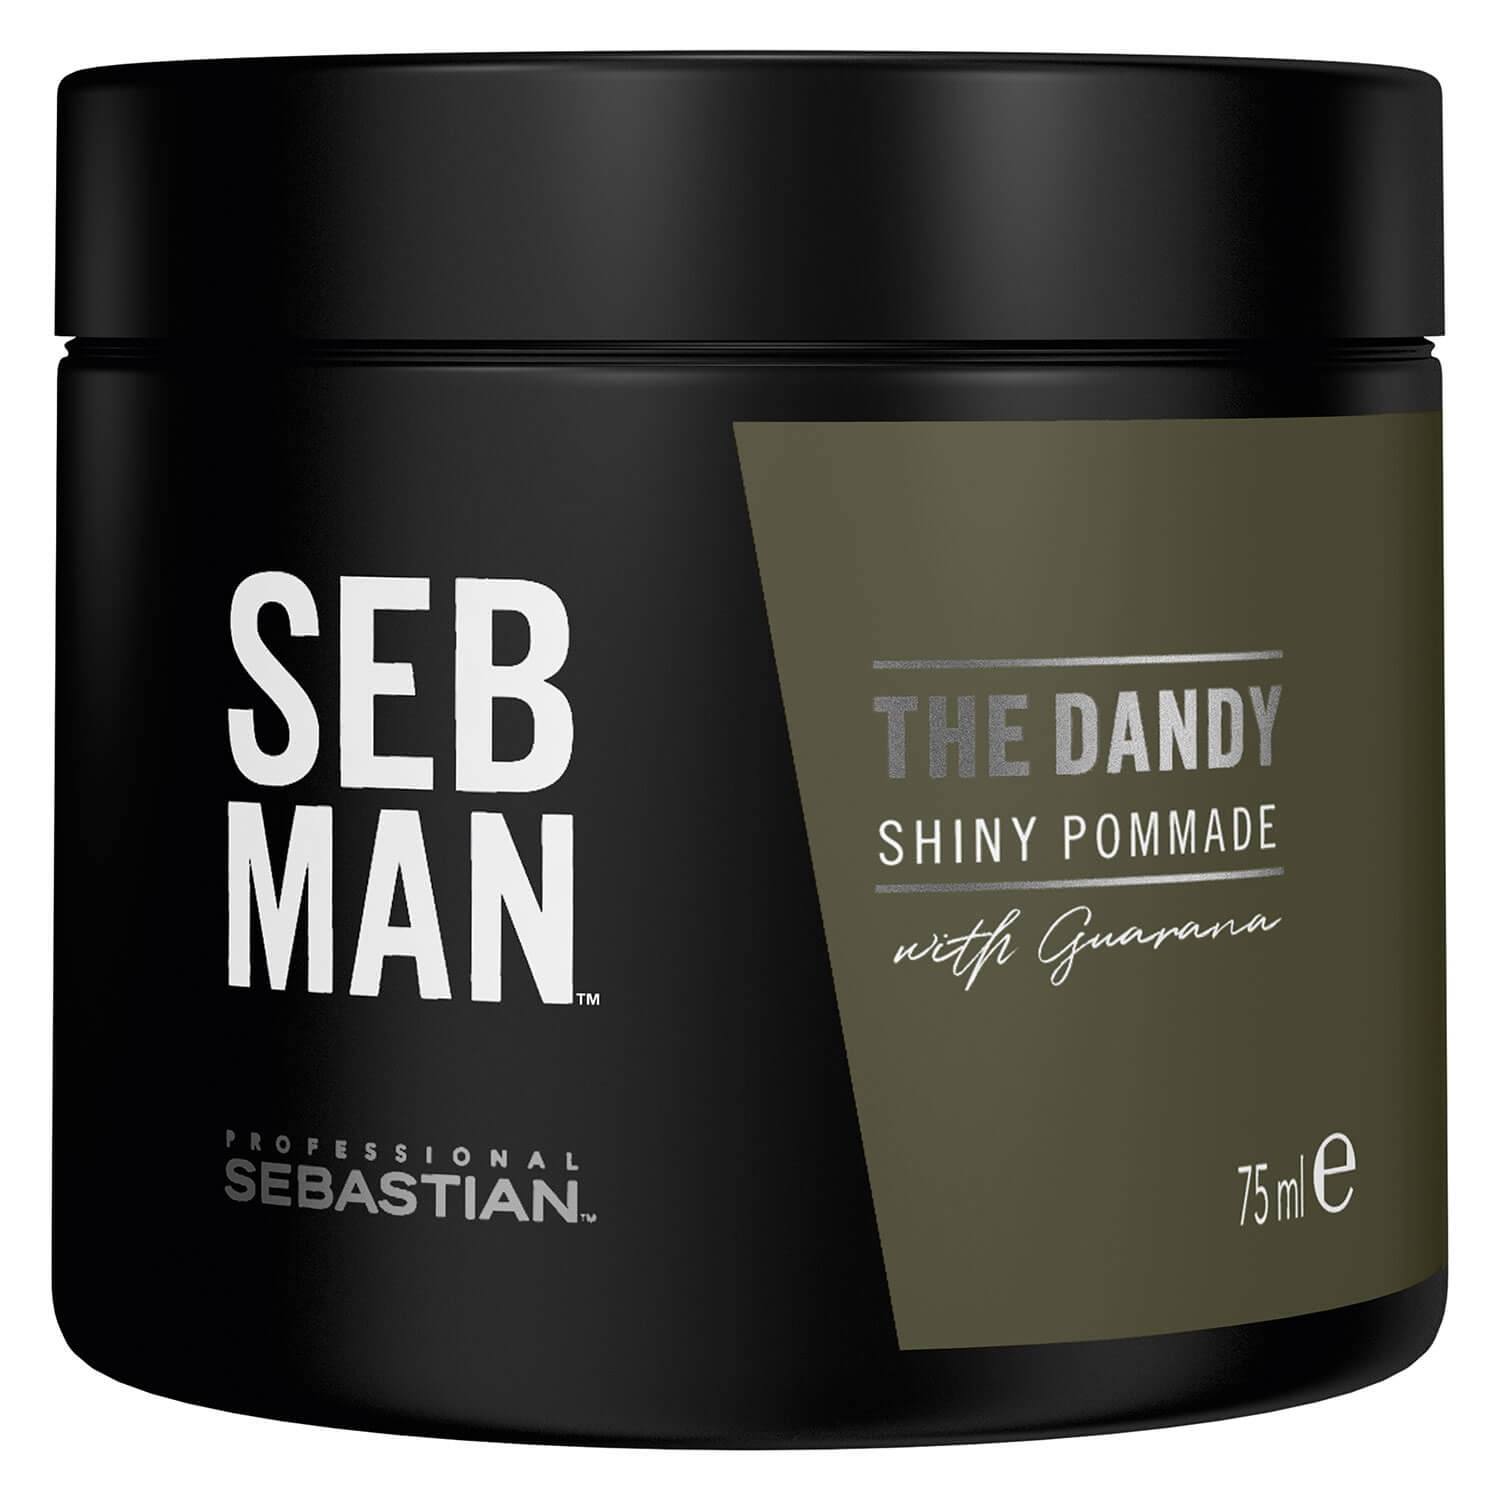 Product image from SEB MAN - The Dandy Shiny Pomade